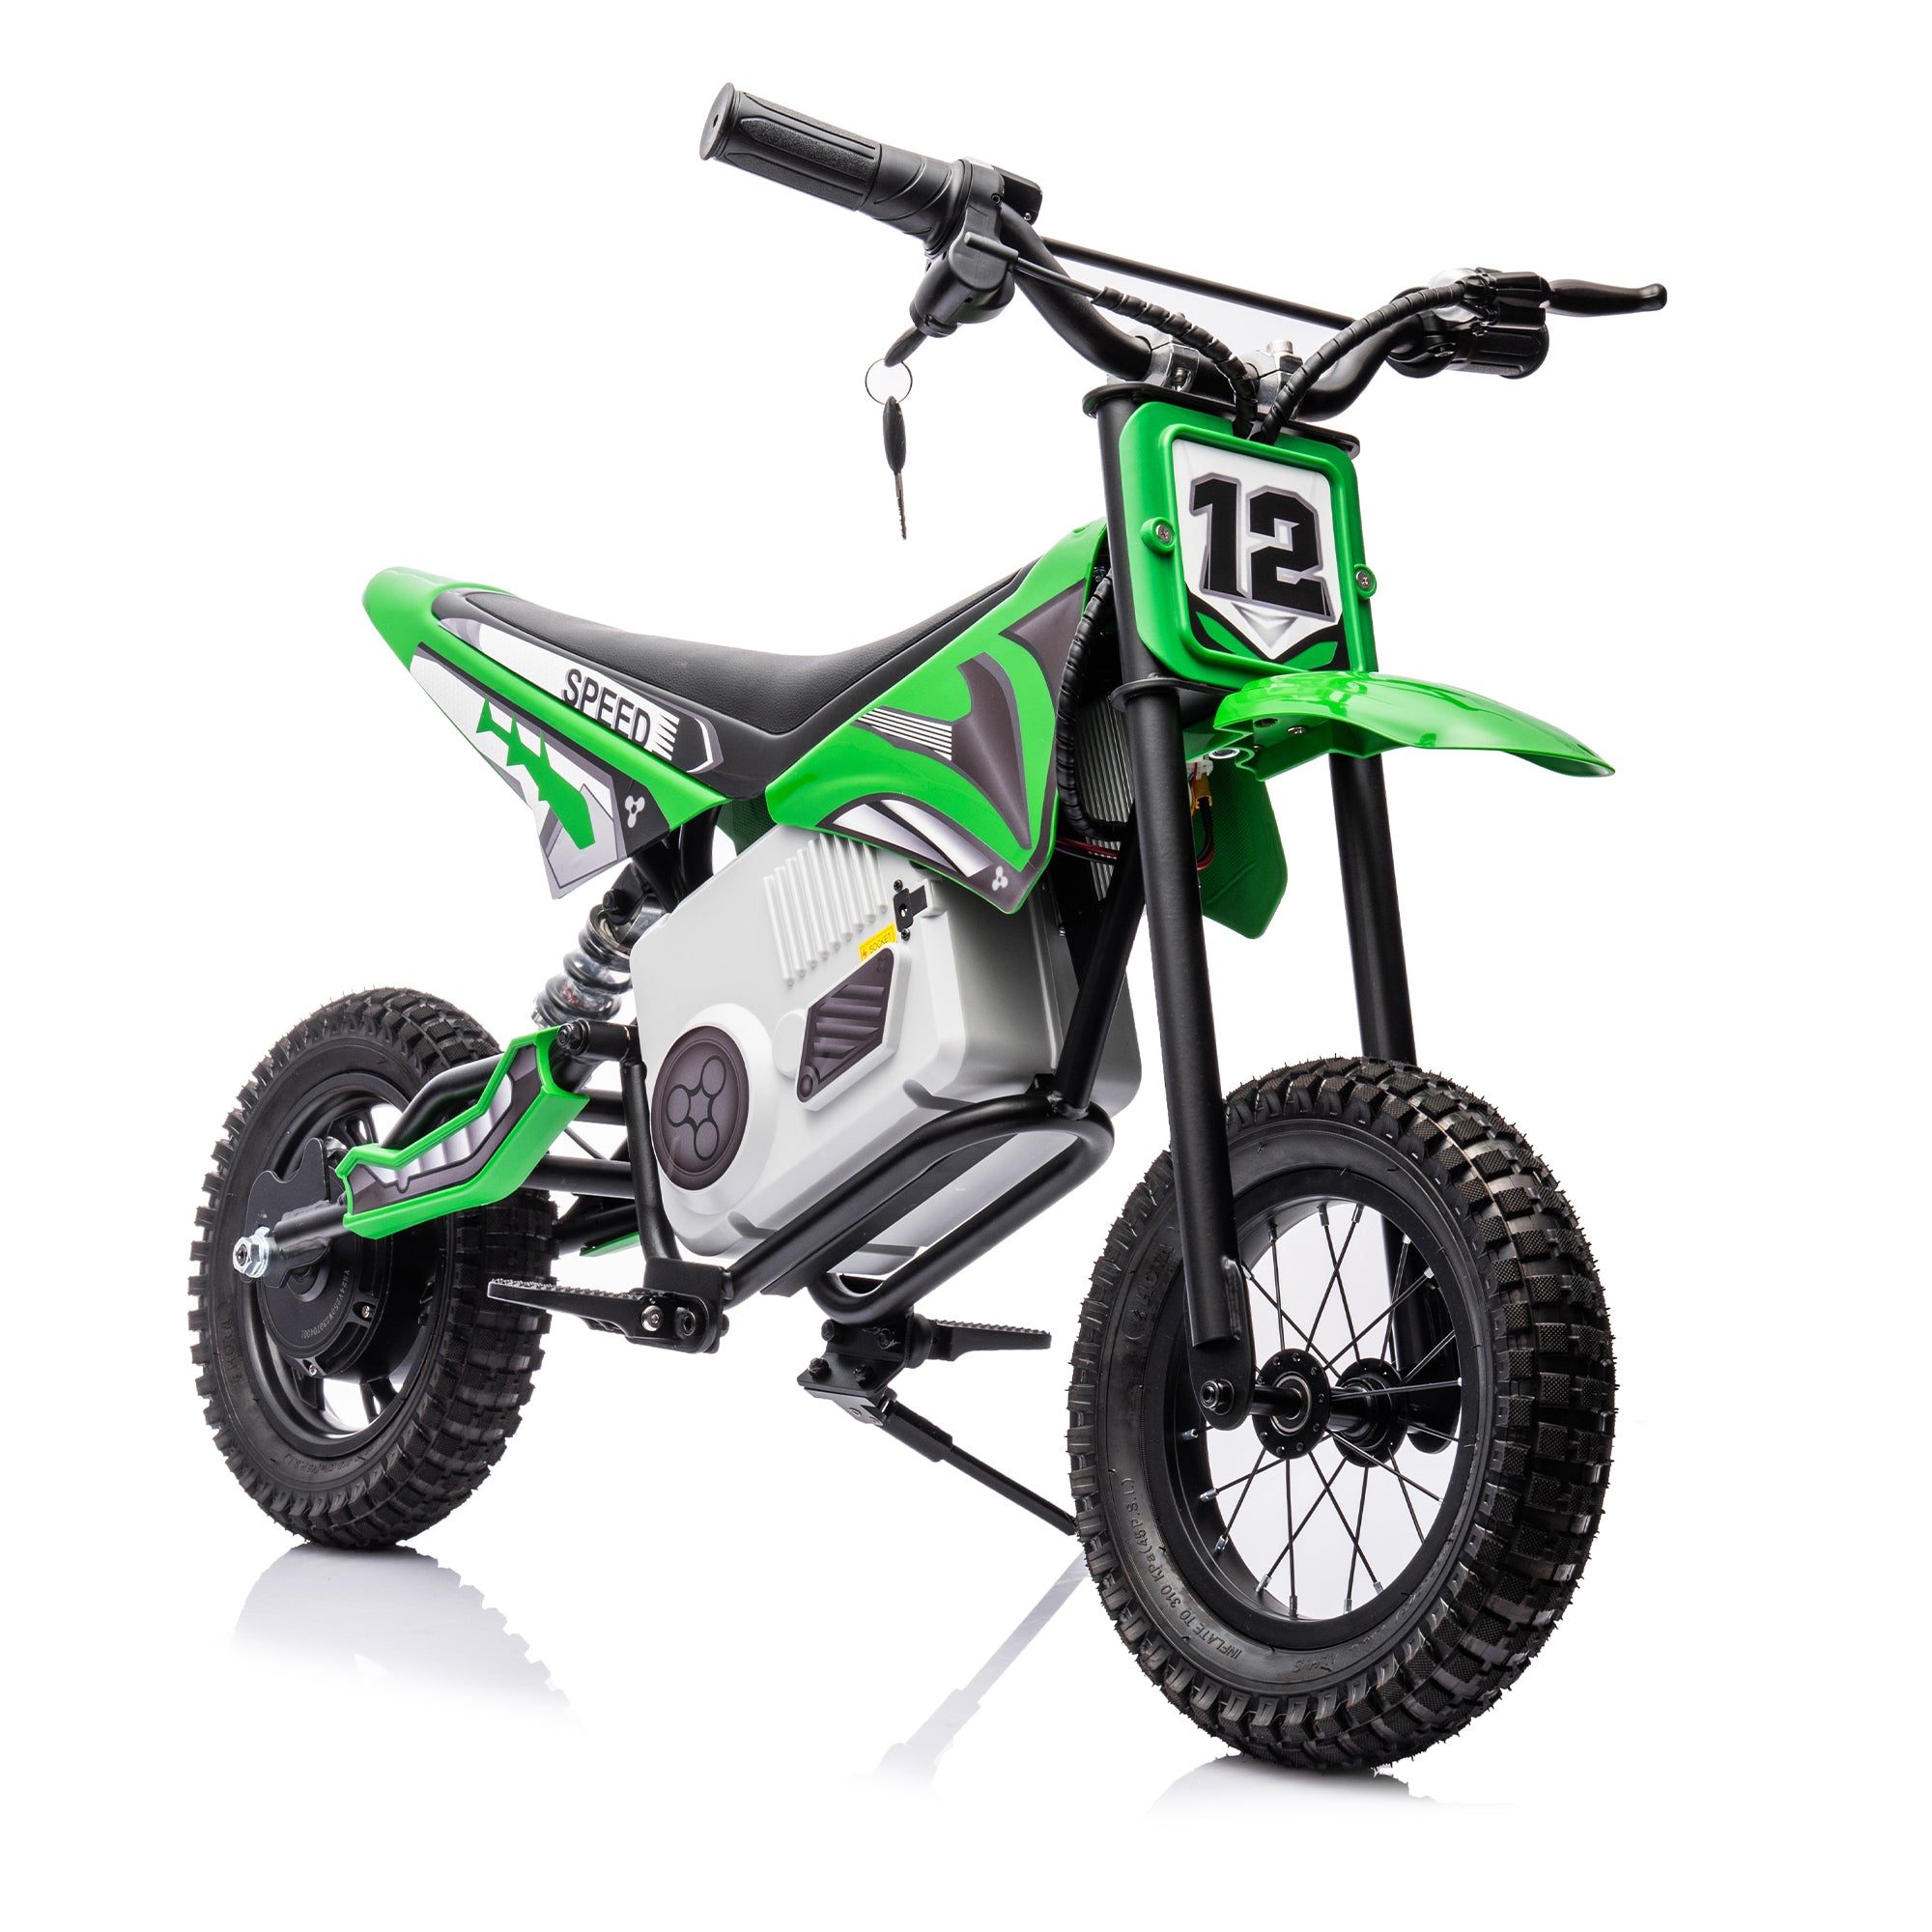 🆓🚛 36V Electric Mini Dirt Motorcycle for Kids, 350W Xxxl Motorcycle, Stepless Variable Speed Drive, Disc Brake, No Chain, Steady Acceleration, Horn, Power Display, Rate Display, 176 Pounds for 50M Or More, Age 14+, Green